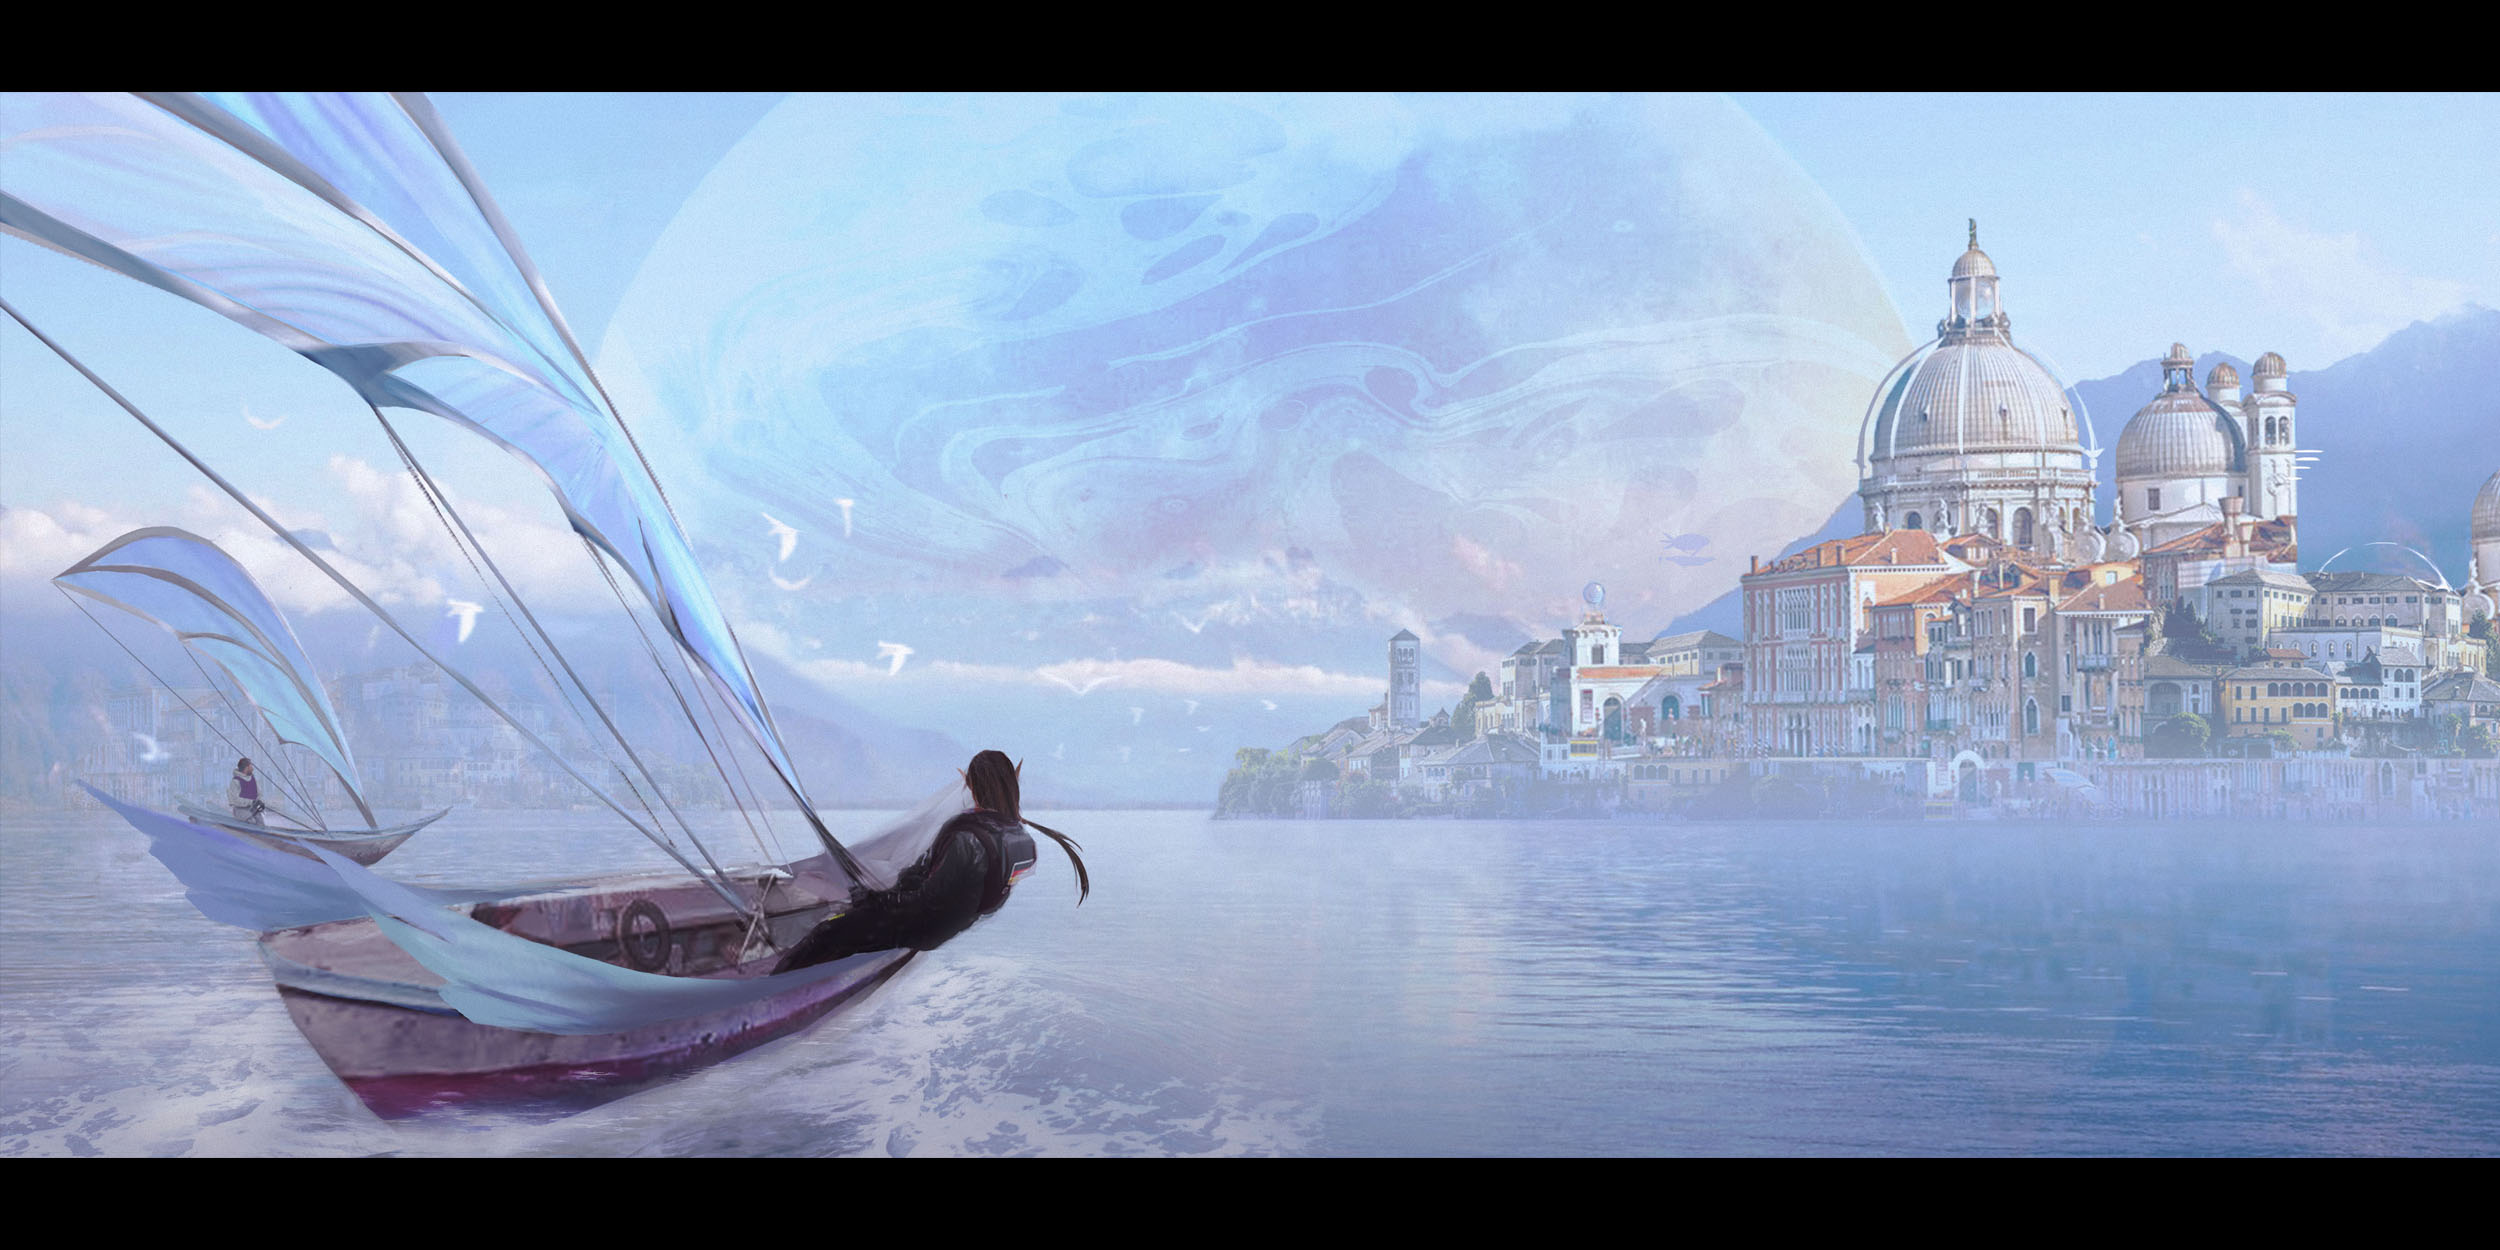 BA environment concept by Kay lee showing fantasy ships going towards a city on water with a large planet in the sky.